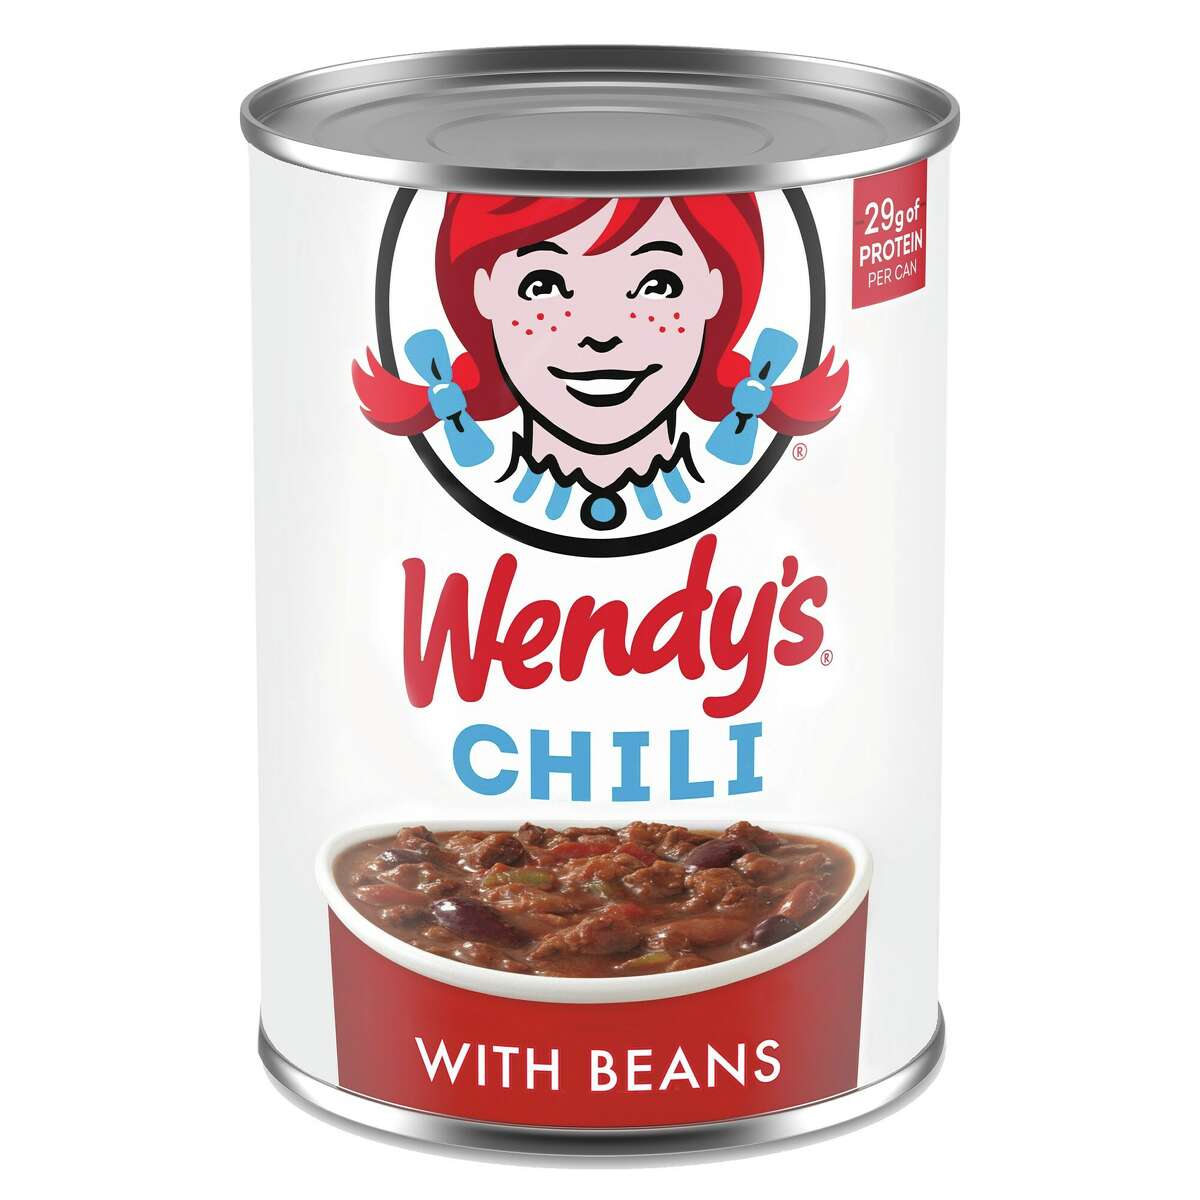 Wendy's Chili with beans will be sold in grocery stores later this spring.